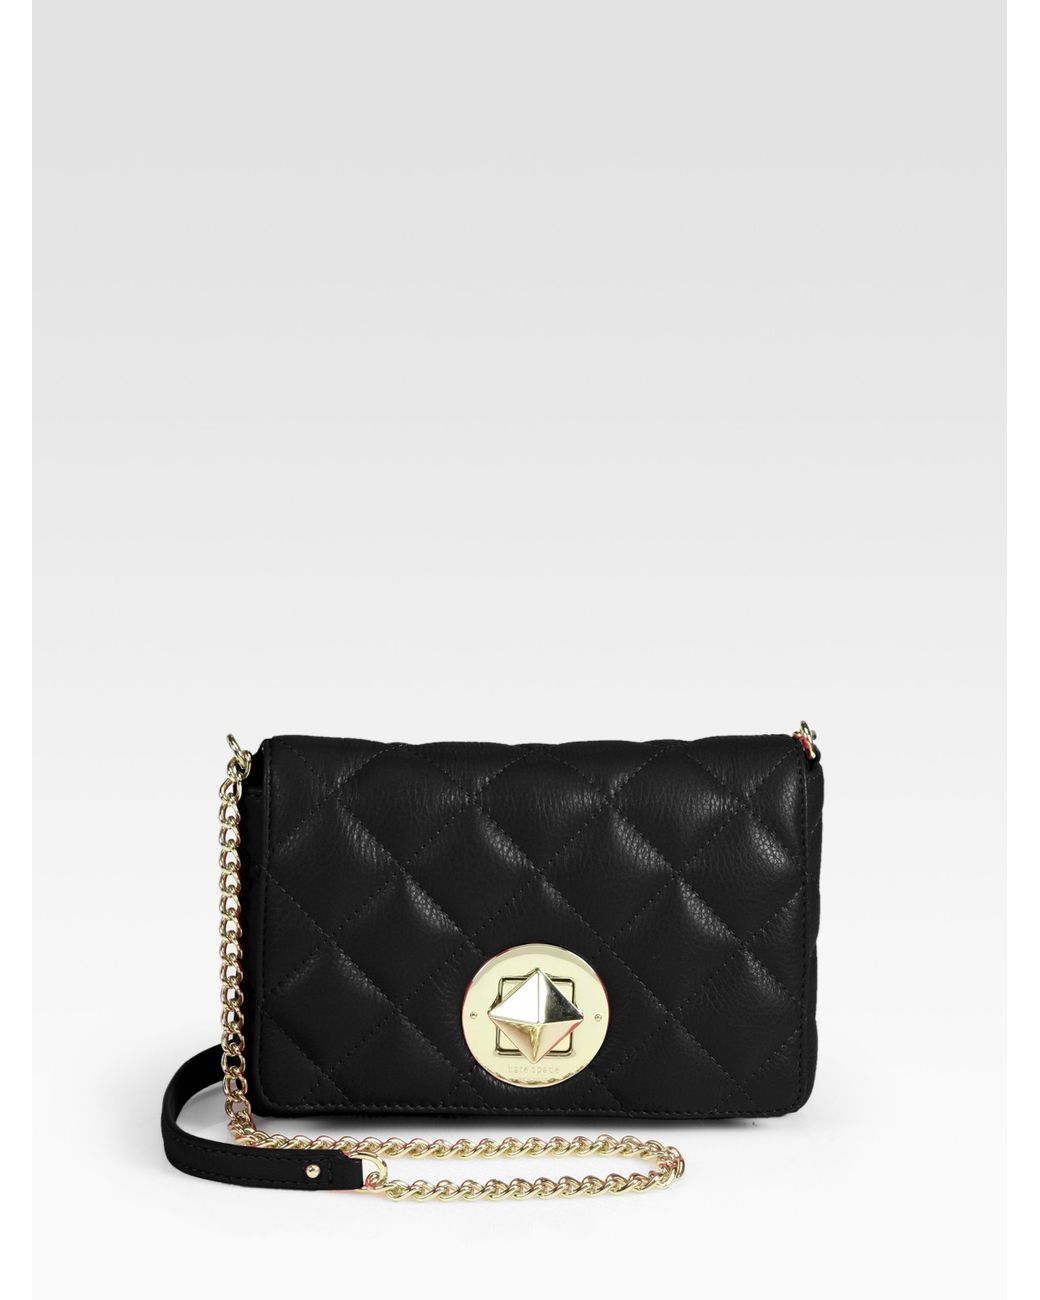 Kate Spade Dove Quilted Leather Chain Crossbody in Black | Lyst